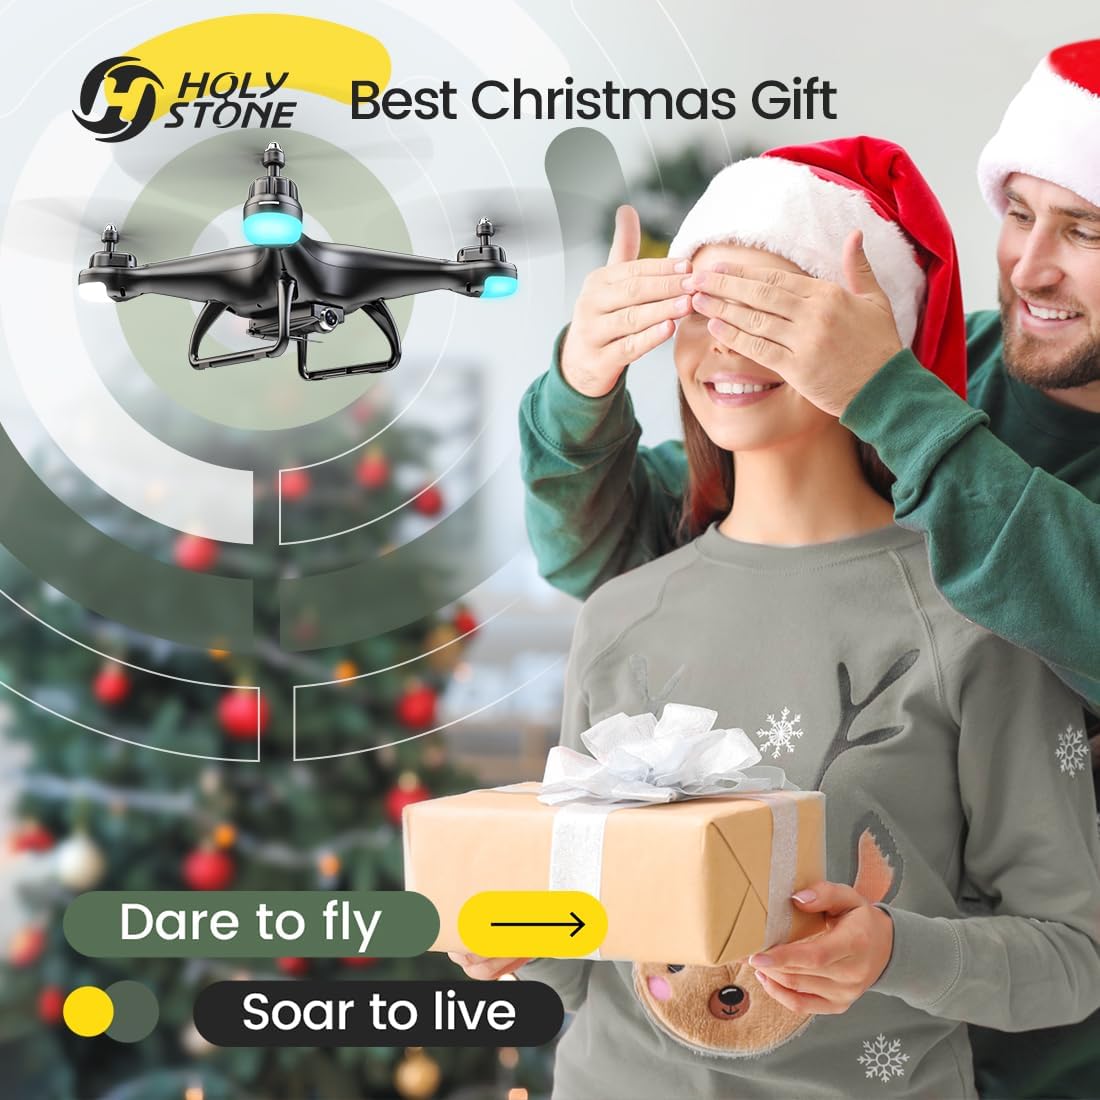 Holy Stone HS110D GPS Drone - $55